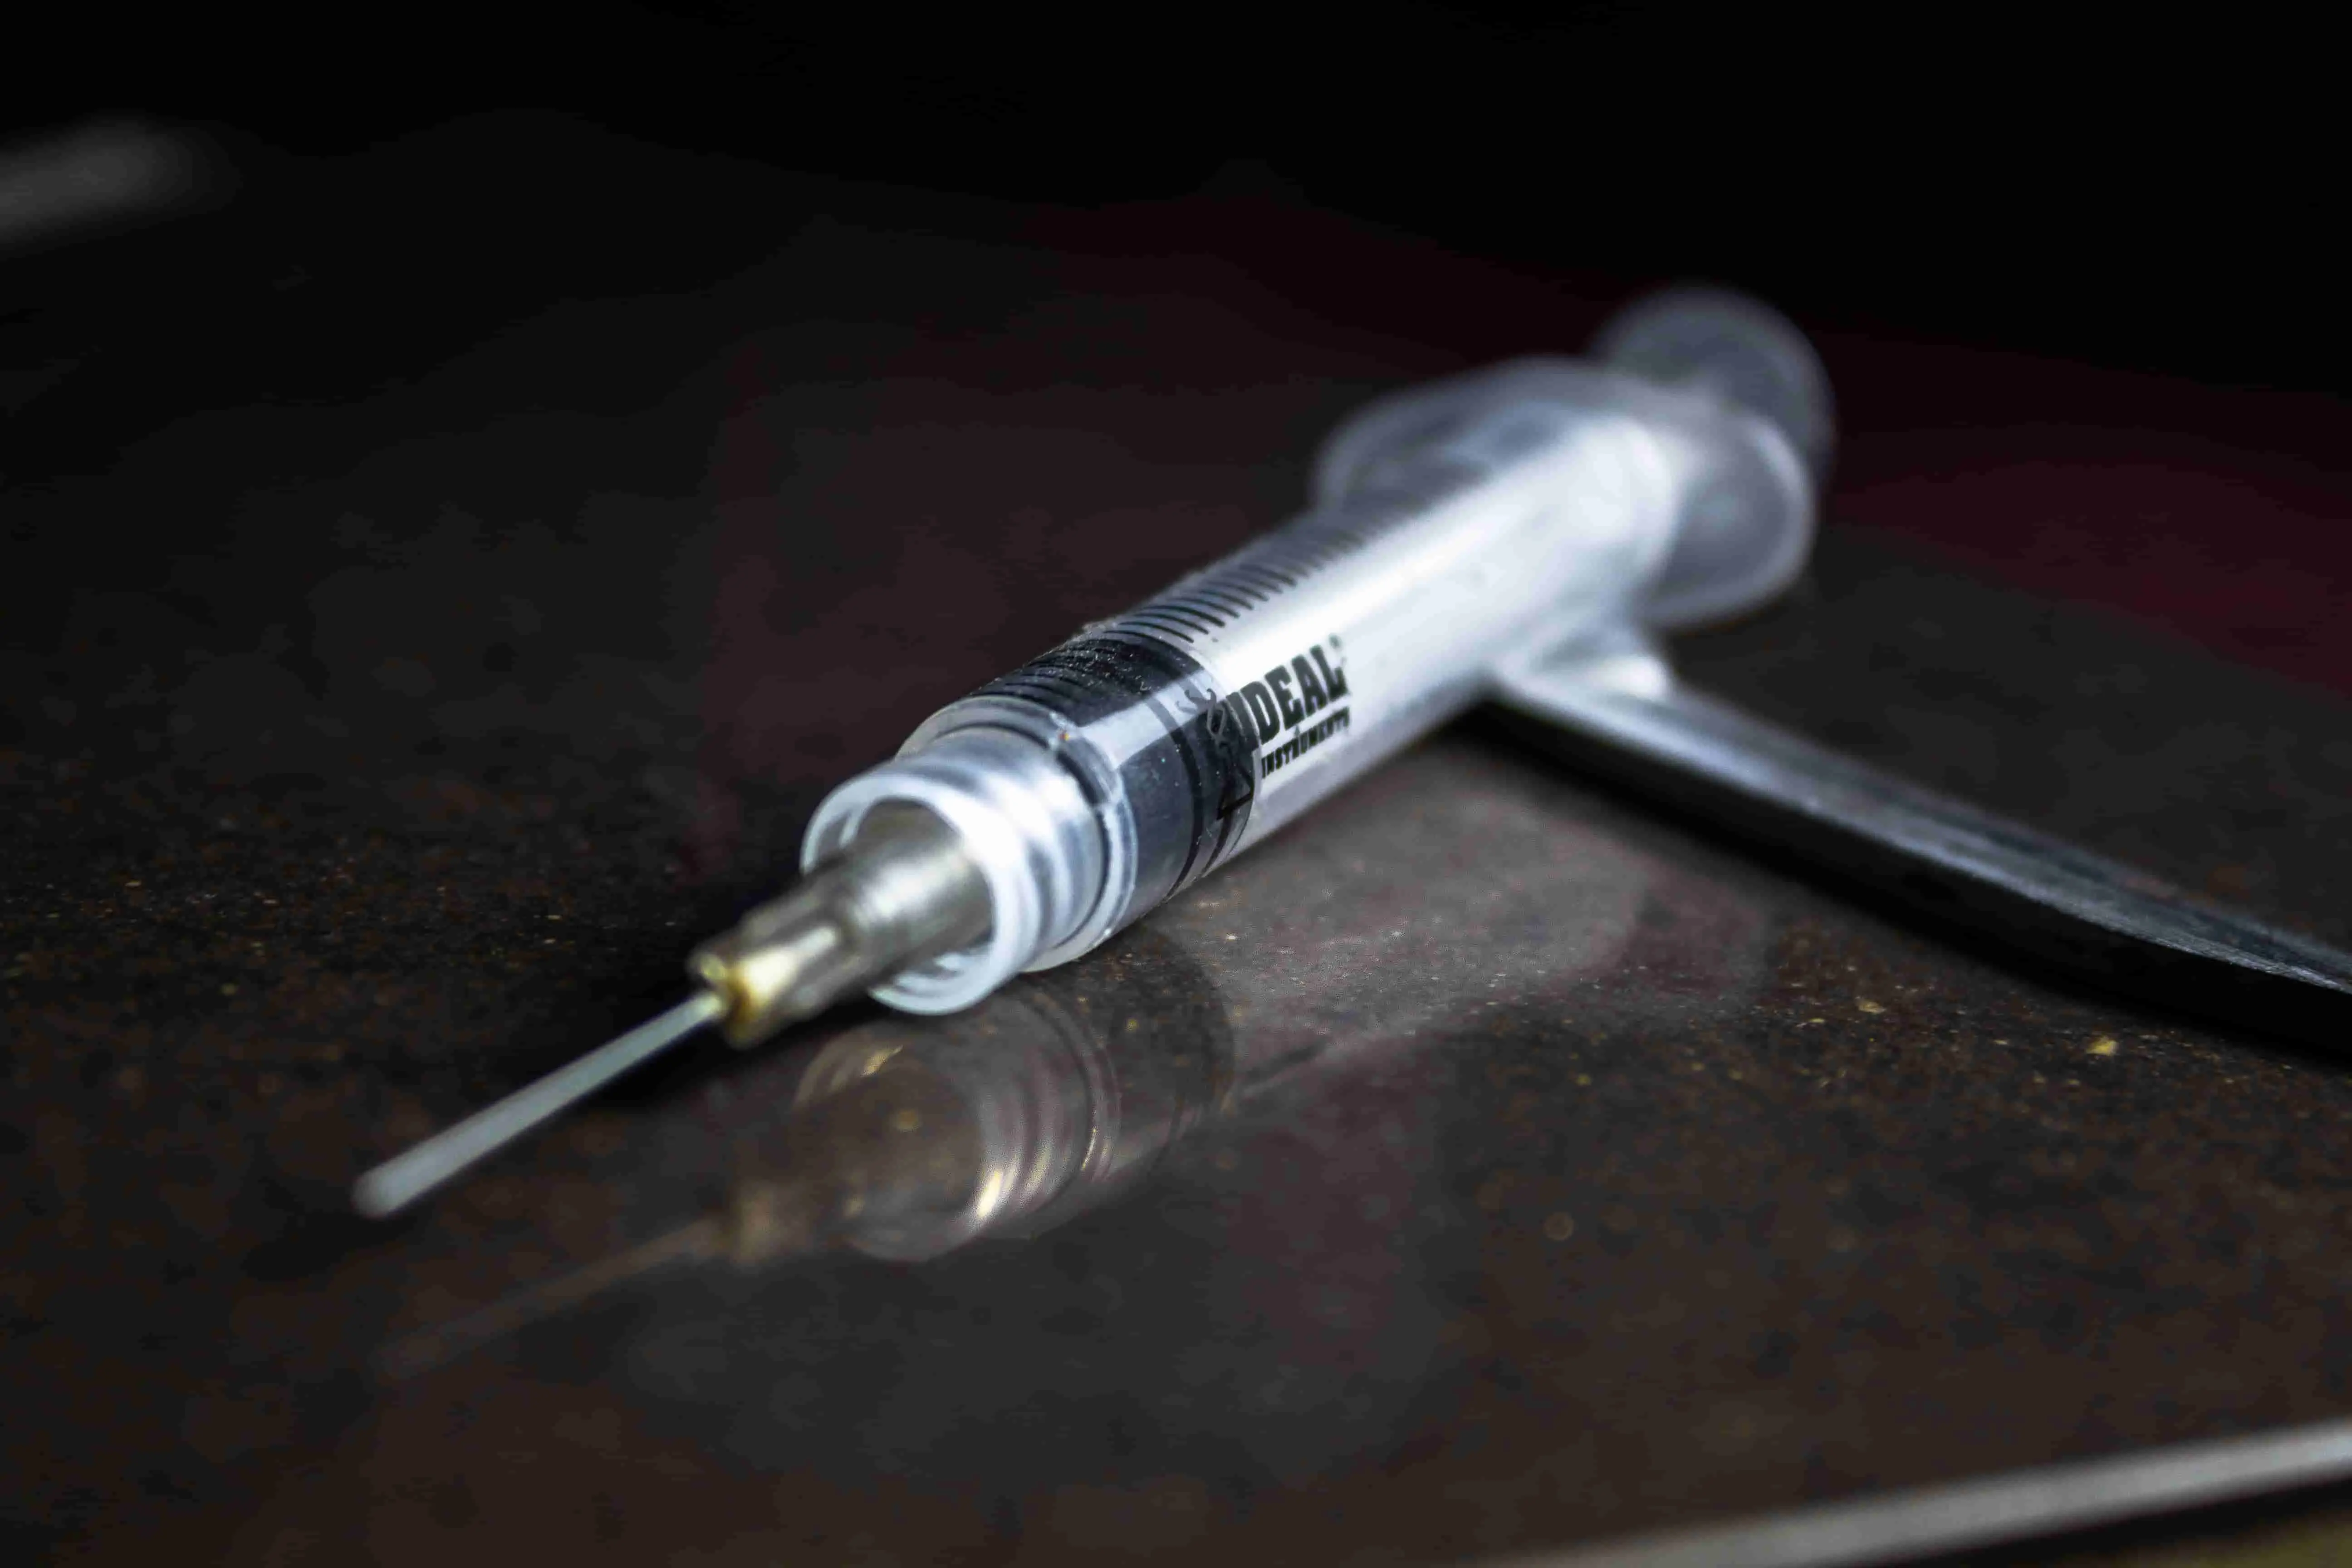 prolotherapy injections